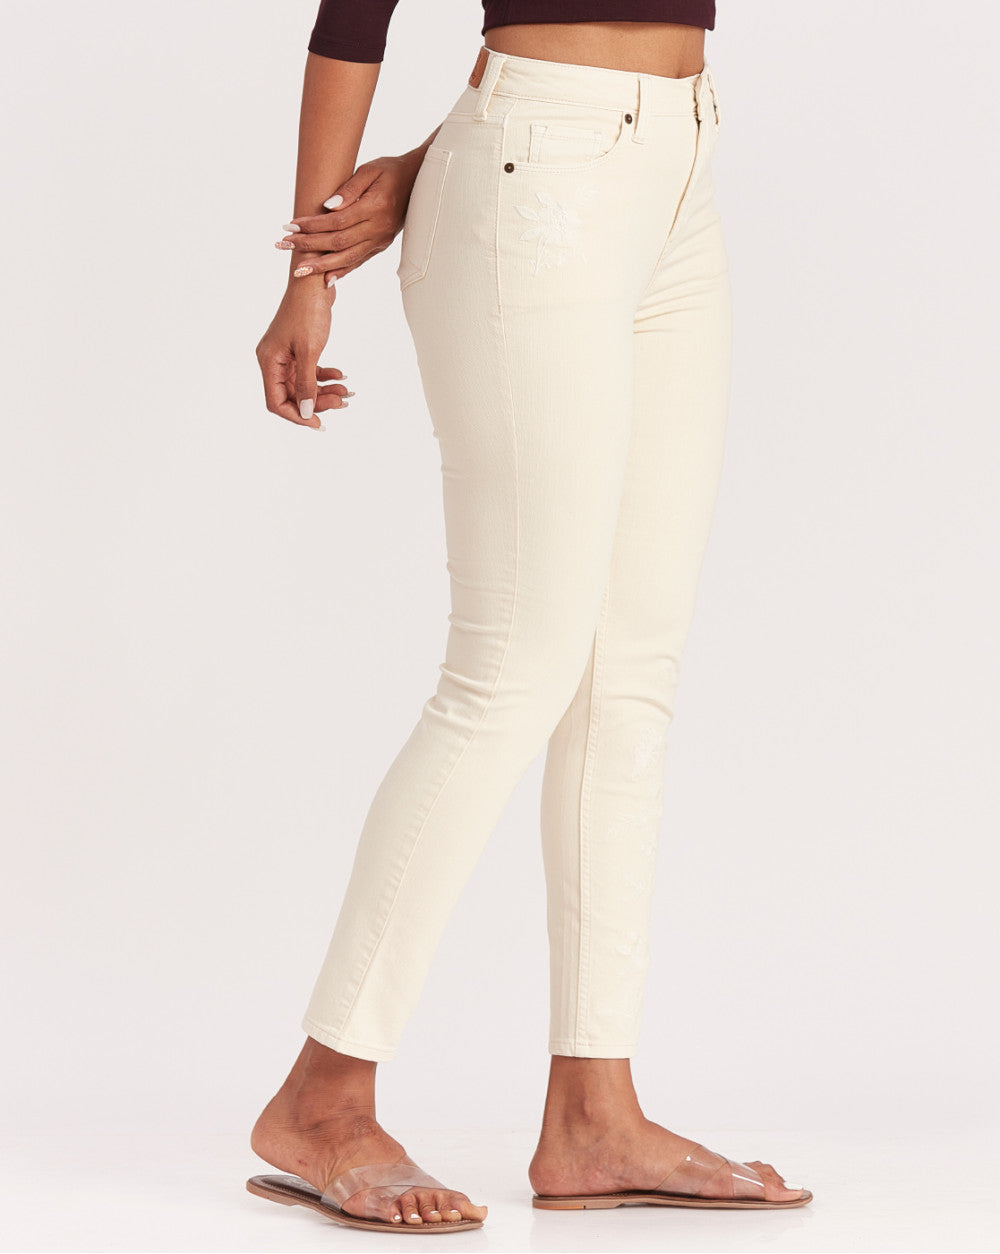 Skinny Fit High Waist Floral Embroidered Colored Jeans - Cream